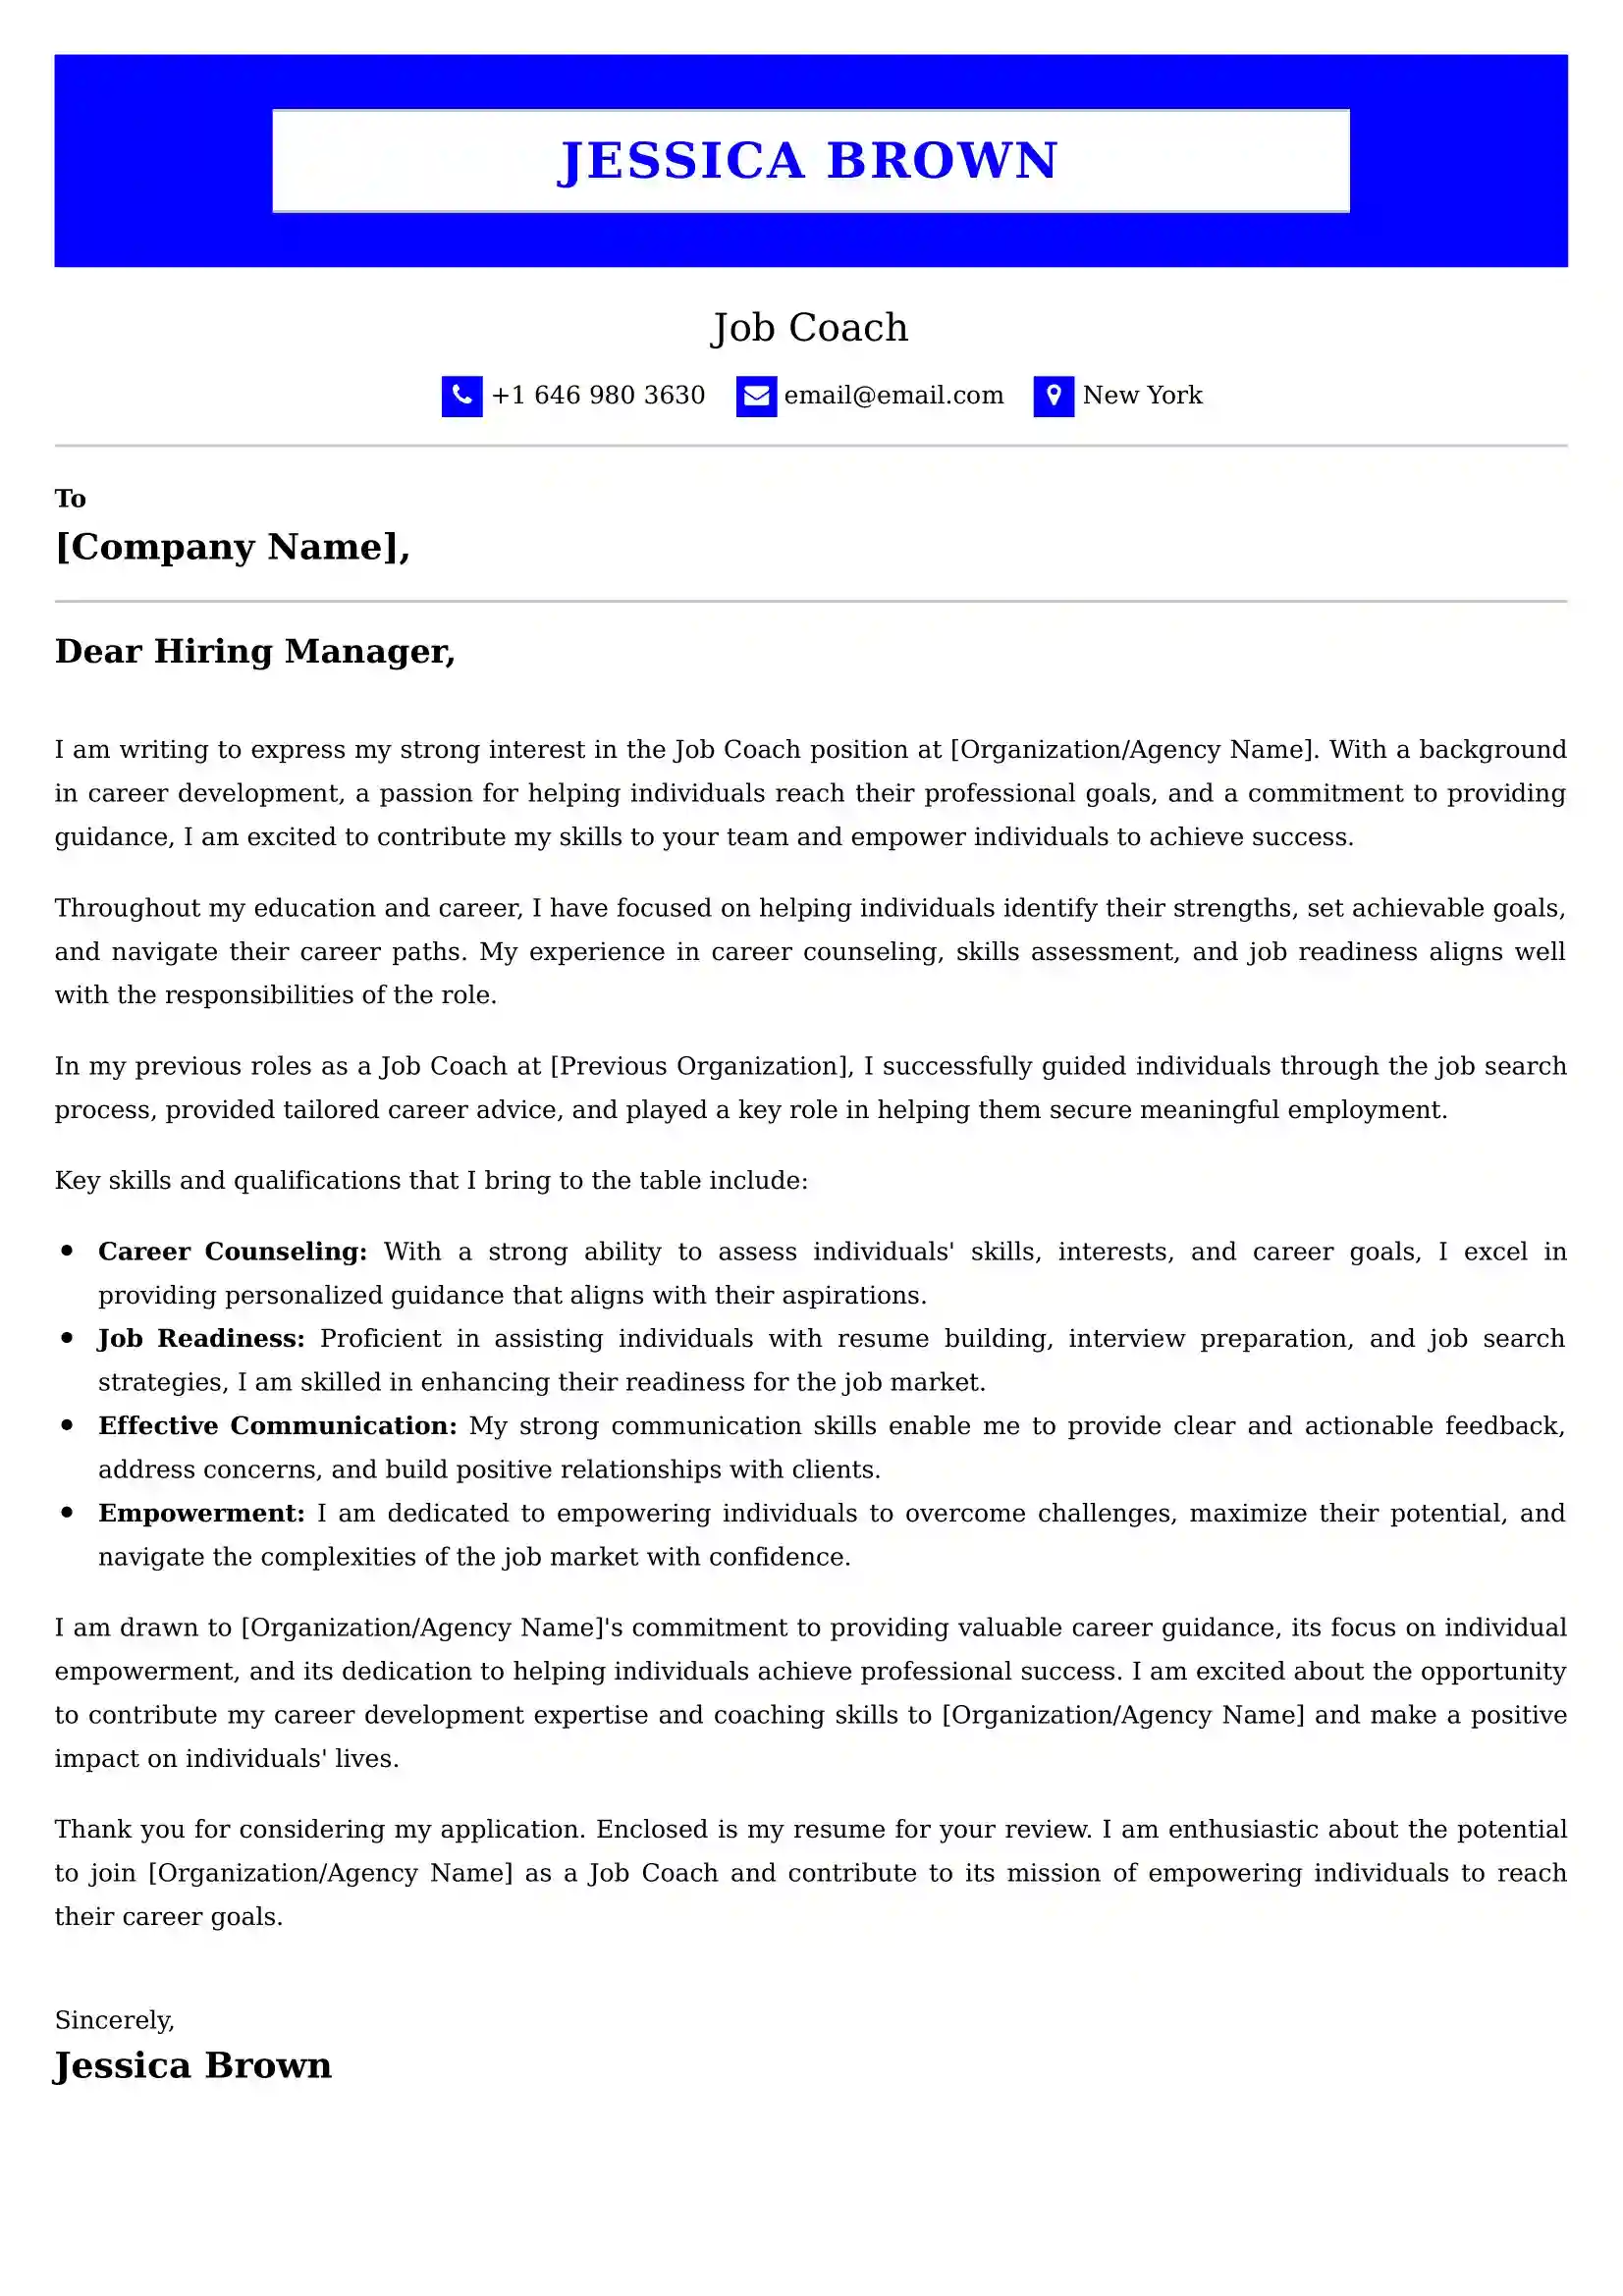 Job Coach Cover Letter Examples for UK 